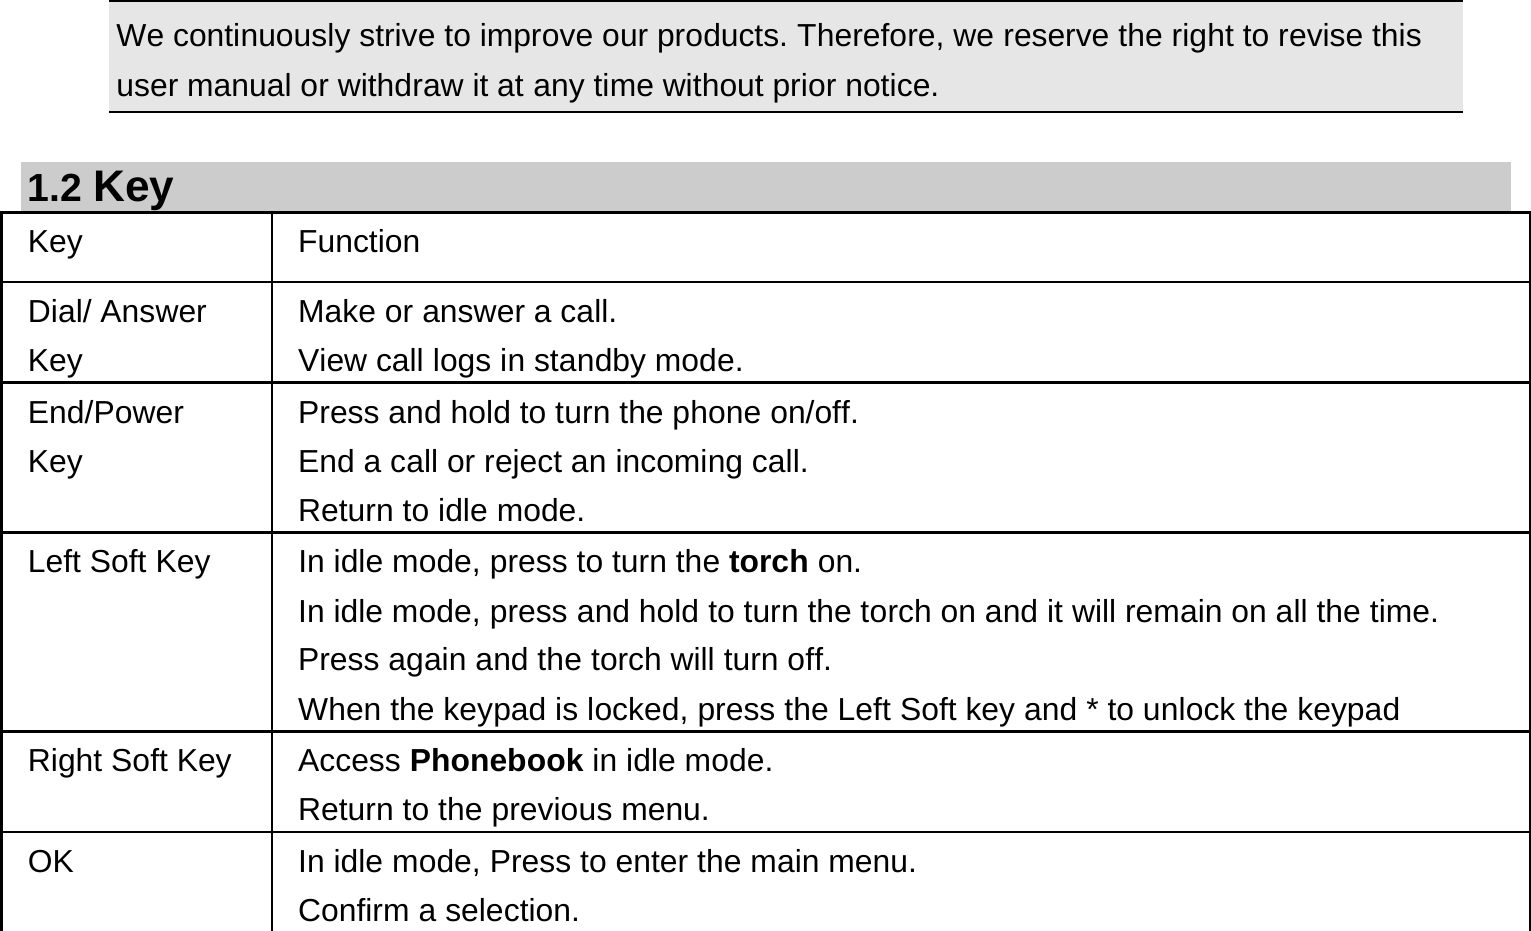 We continuously strive to improve our products. Therefore, we reserve the right to revise this user manual or withdraw it at any time without prior notice.    1.2 Key Key Function  Dial/ Answer Key Make or answer a call. View call logs in standby mode. End/Power Key Press and hold to turn the phone on/off. End a call or reject an incoming call. Return to idle mode. Left Soft Key  In idle mode, press to turn the torch on. In idle mode, press and hold to turn the torch on and it will remain on all the time. Press again and the torch will turn off. When the keypad is locked, press the Left Soft key and * to unlock the keypad Right Soft Key  Access Phonebook in idle mode.   Return to the previous menu.   OK  In idle mode, Press to enter the main menu.   Confirm a selection. 